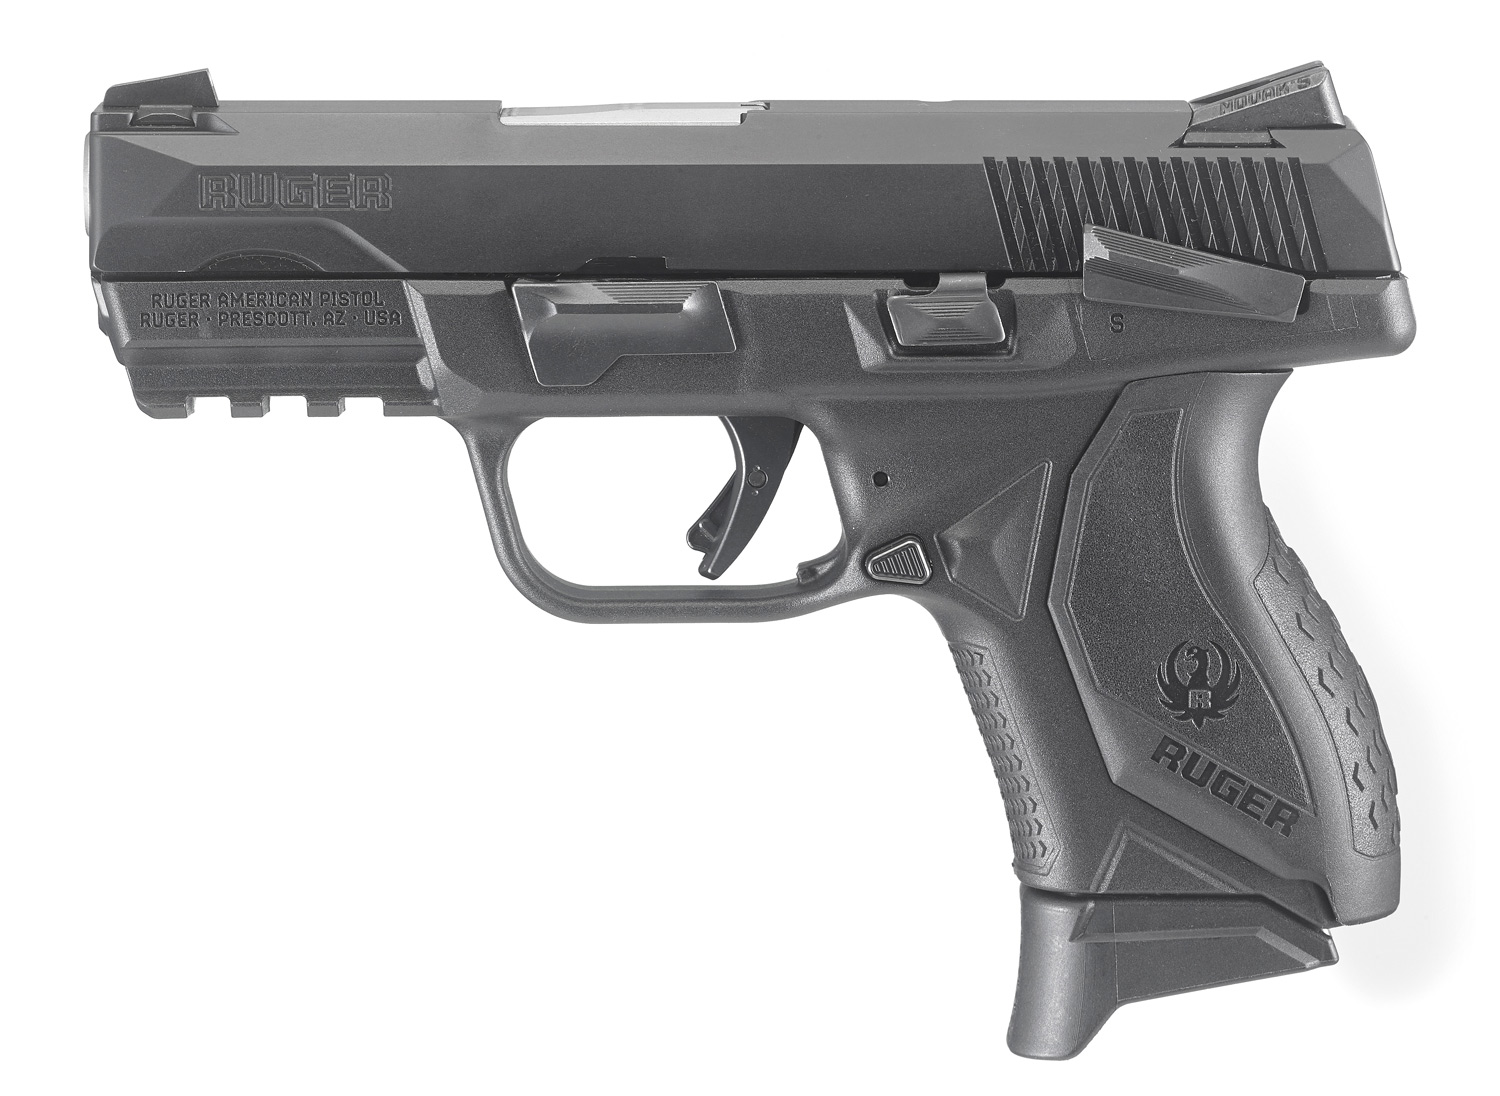 The Ruger American Pistol